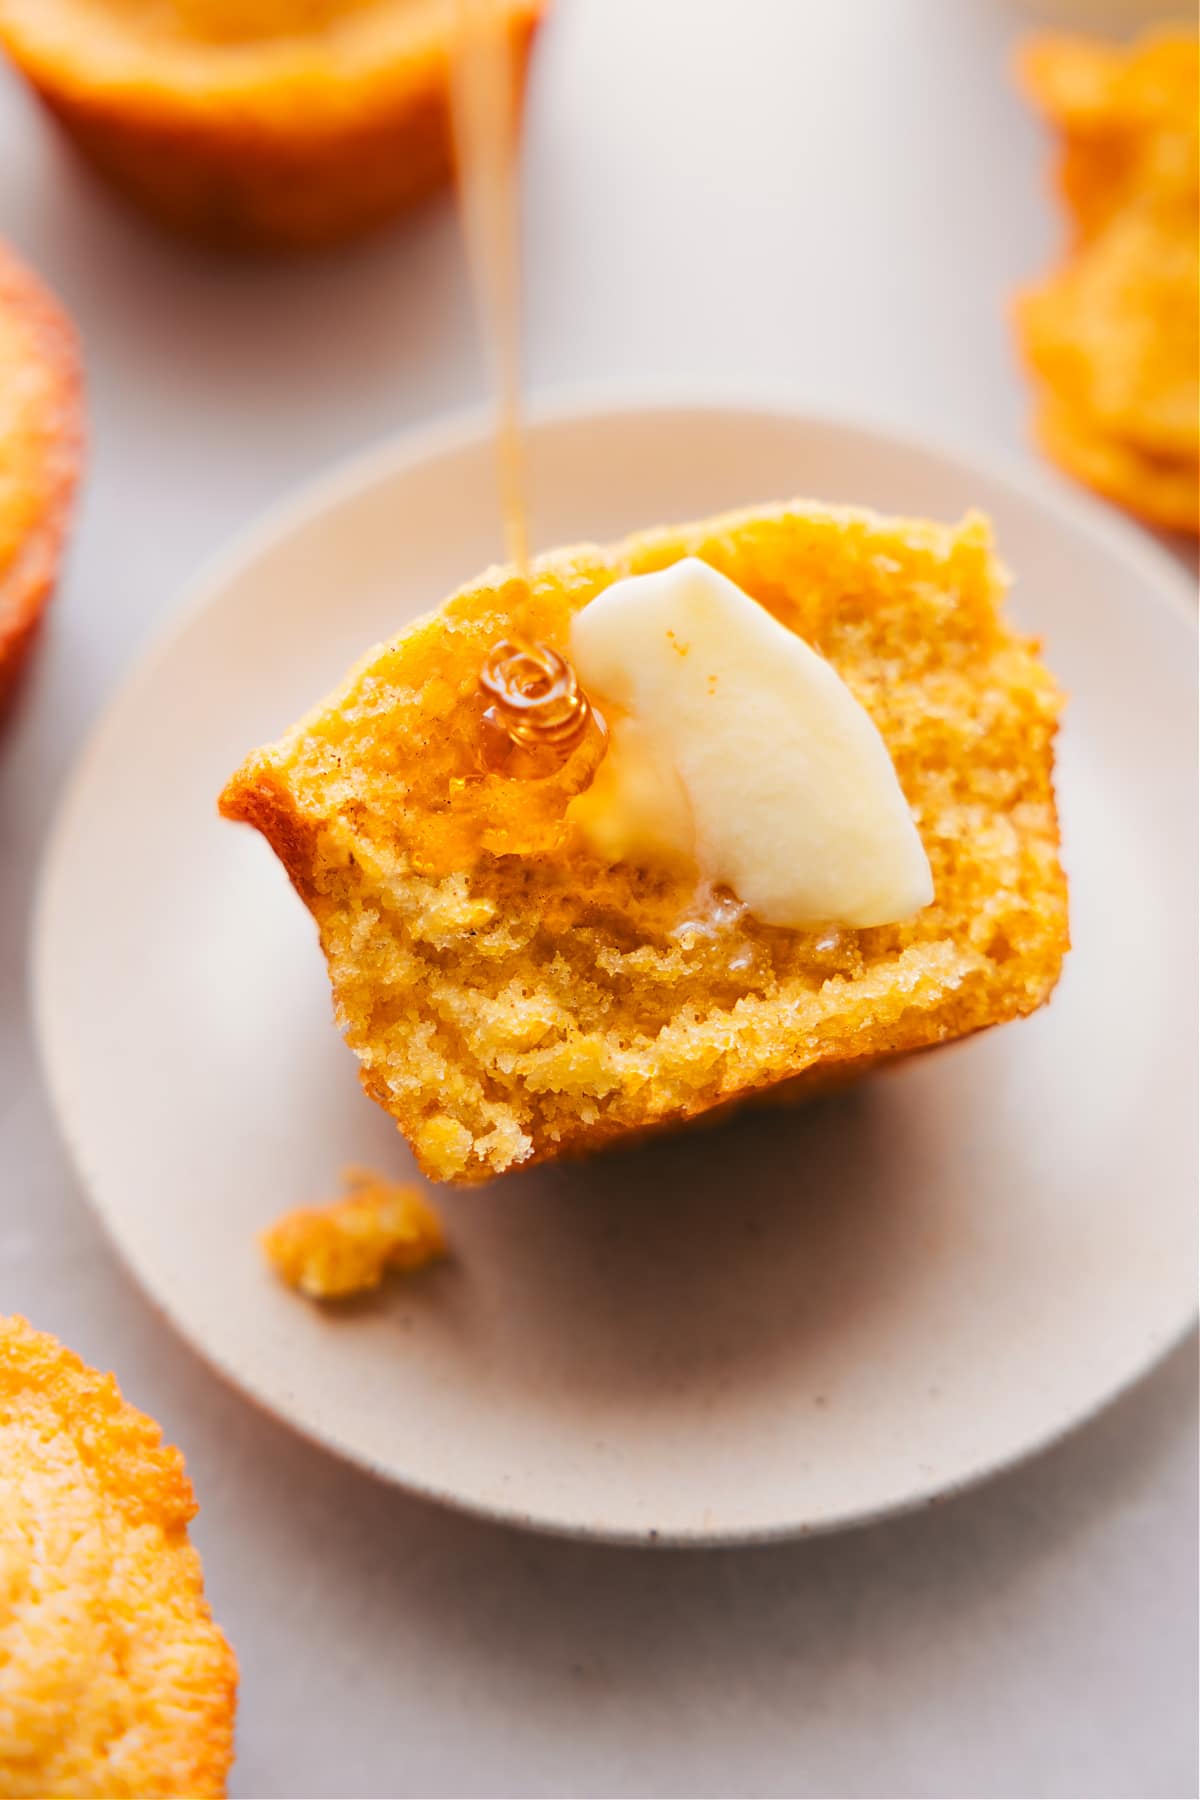 Freshly baked cornbread muffin, cut in half to reveal its fluffy interior, served with butter and honey on top.